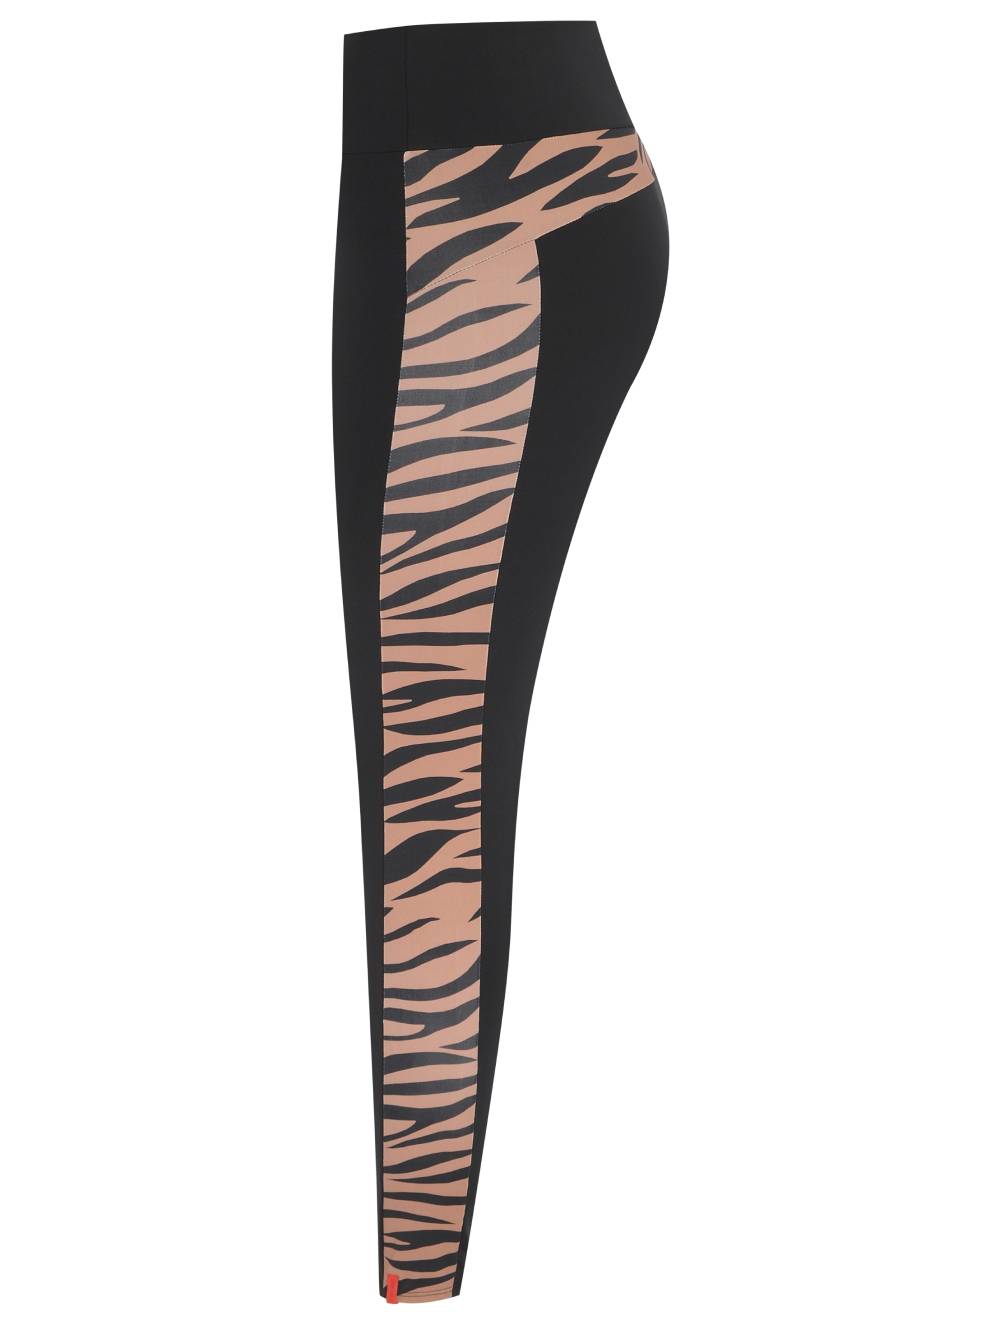 Tiger leggings with side cutouts